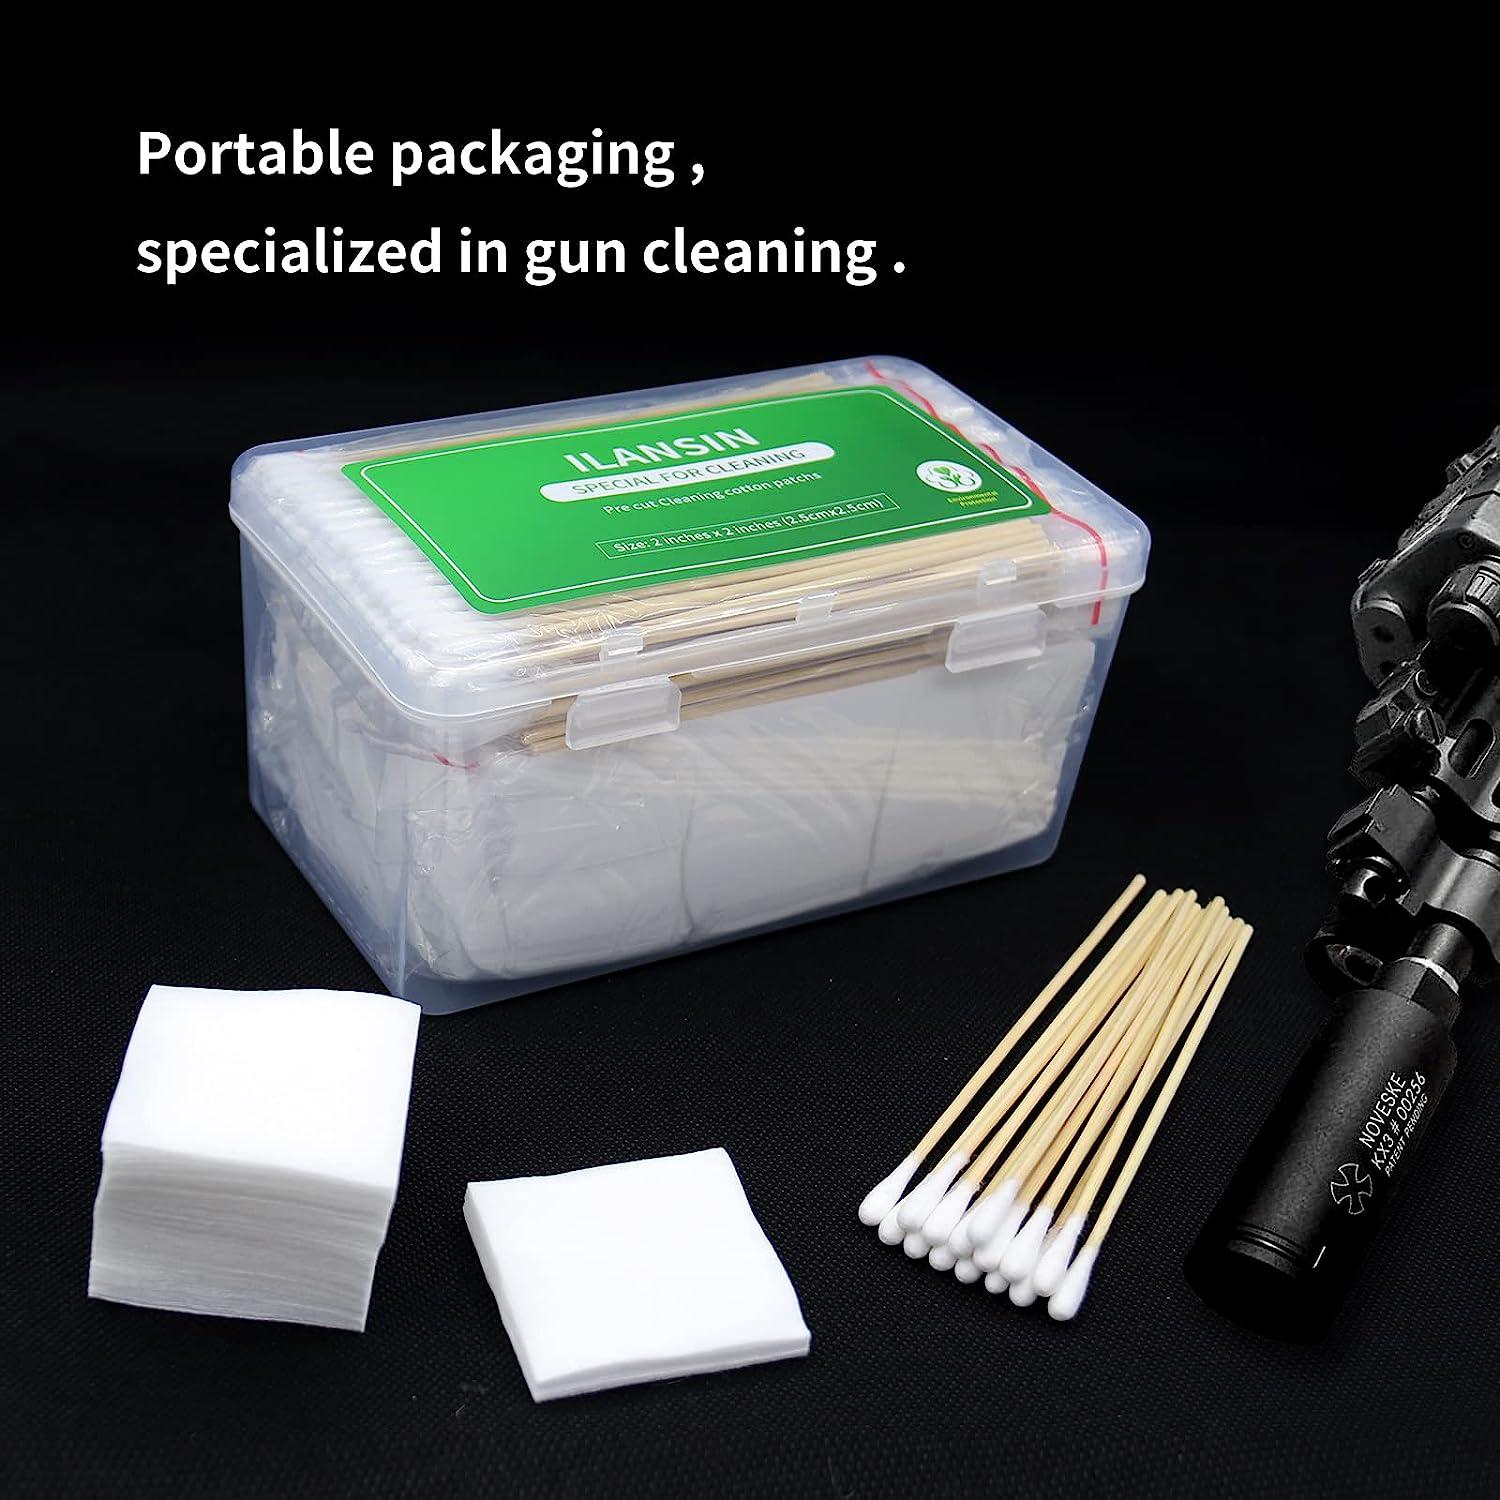 ILANSIN 1500PCS Gun Cleaning Patches and 200PCS gun cleaning swabs,2x2  Lint Free gun cleaning rags,6long cotton swabs For 9mm and Most Caliber Of  Firearms.Boxes Can Store Gun Cleaning Kit And tools